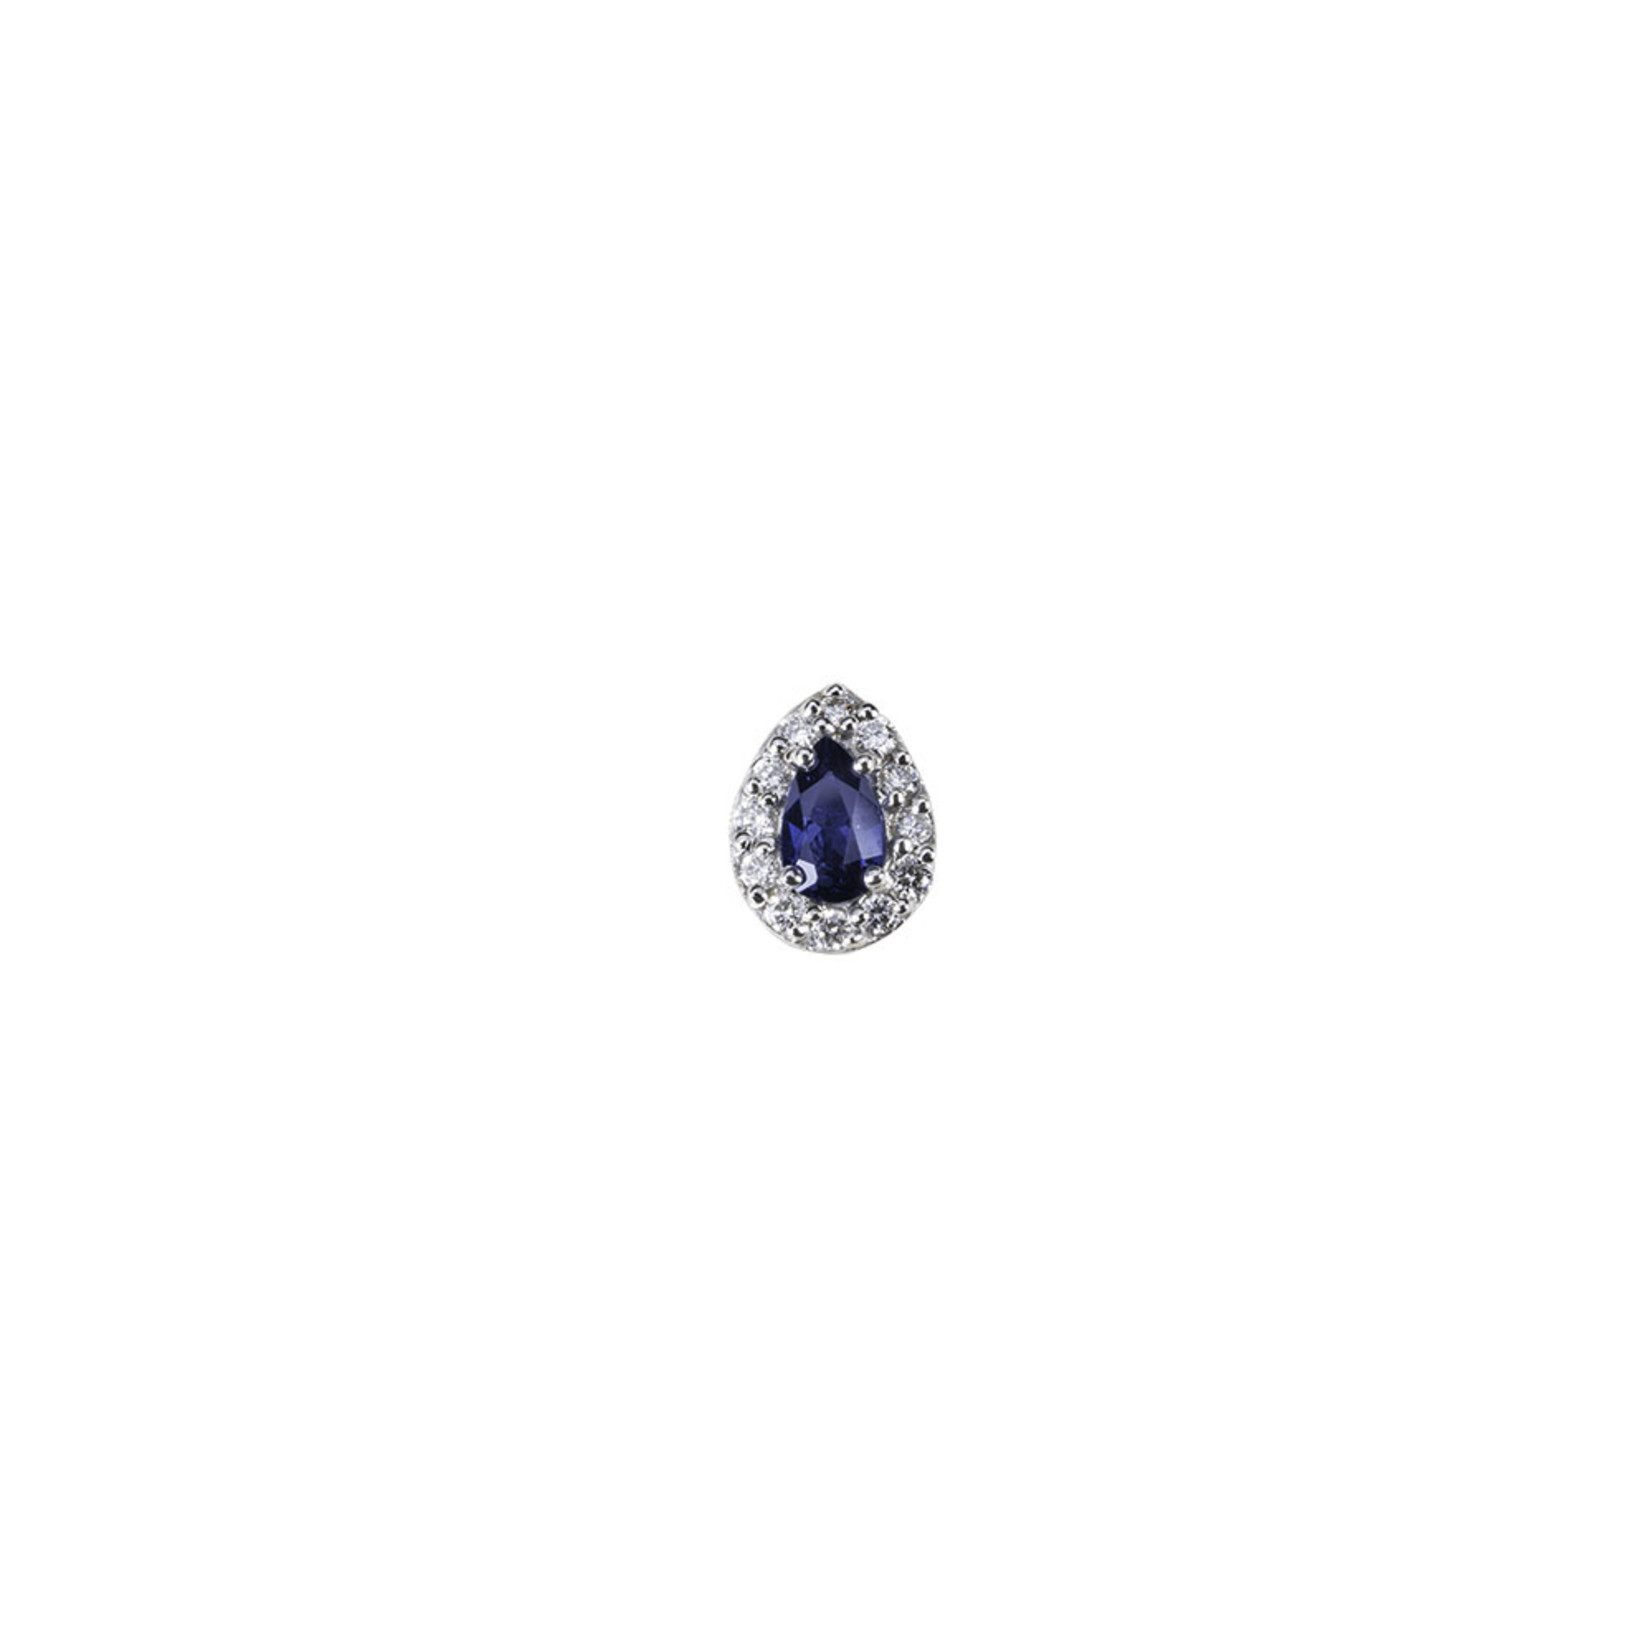 BVLA BVLA white gold "Pear Altura" threaded end with 12x 1.0 micro-pave set VS1 diamond and 4x2.5 AA sapphire pear